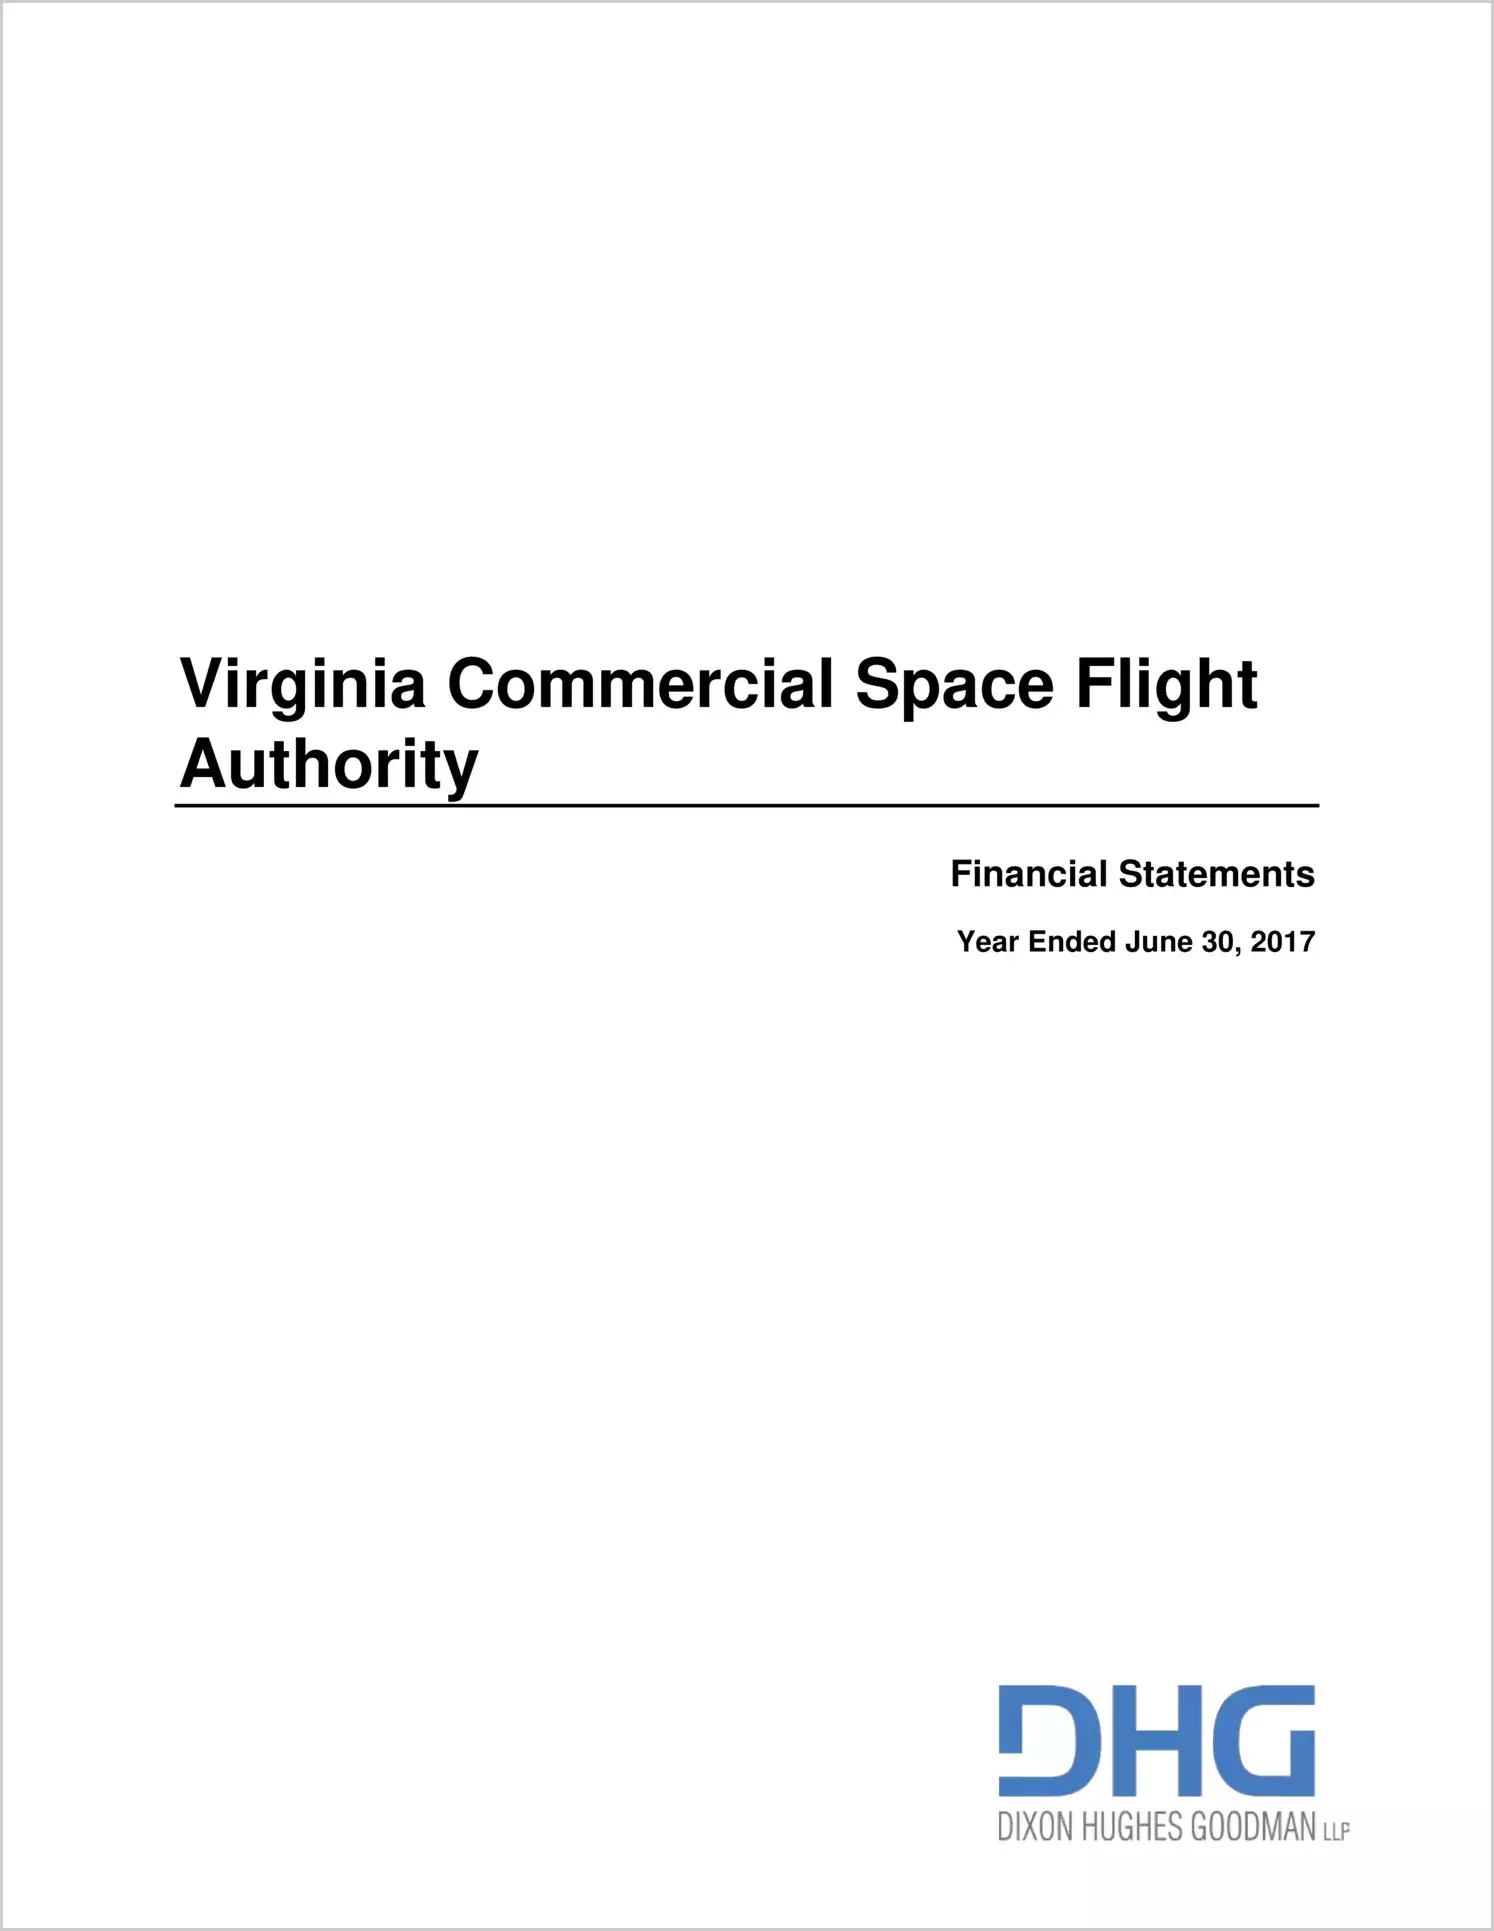 Virginia Commercial Space Flight Authority Financial Statements for the year ended June 30, 2017